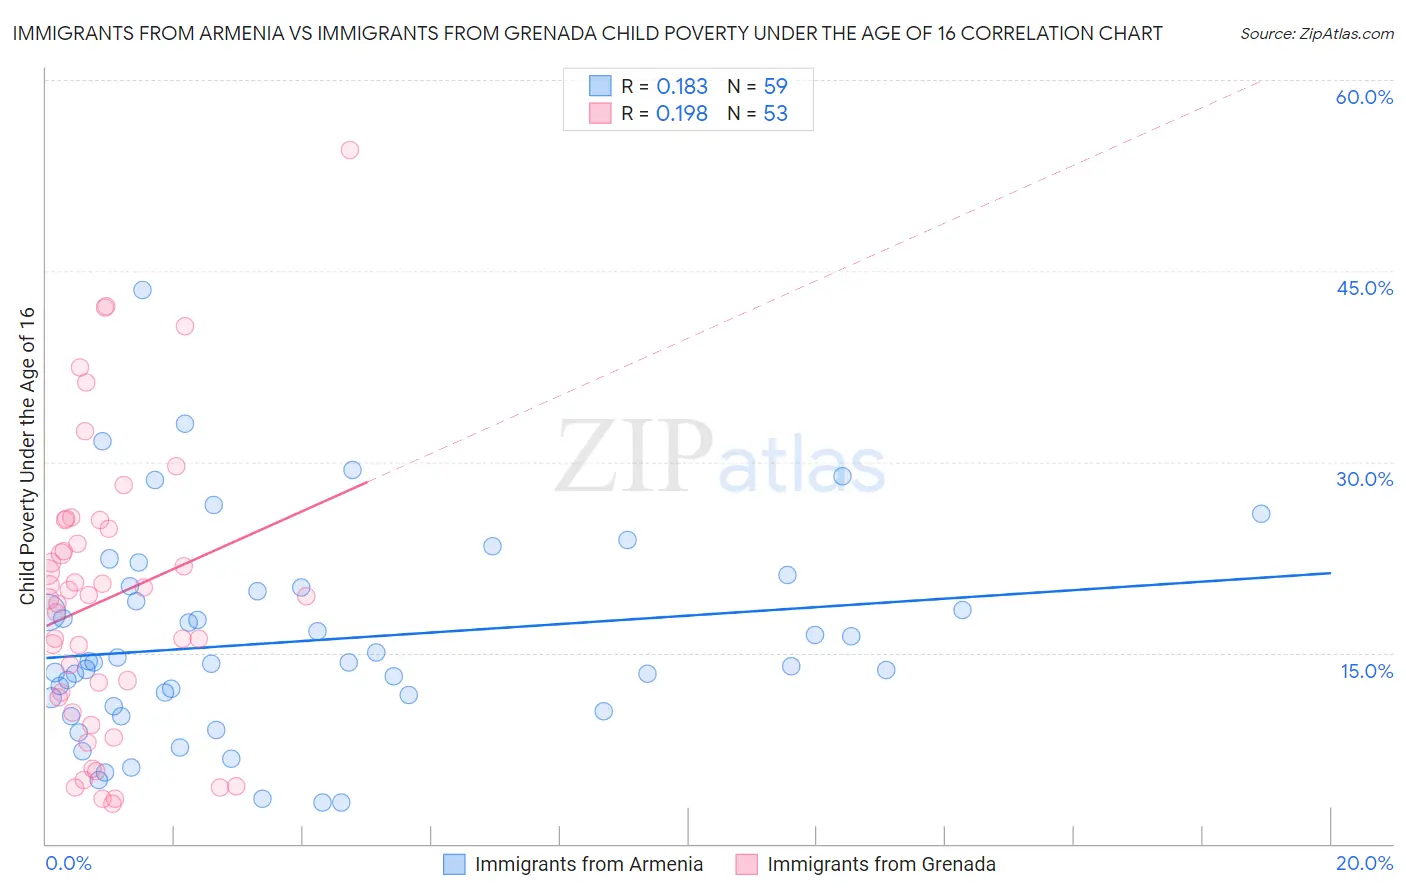 Immigrants from Armenia vs Immigrants from Grenada Child Poverty Under the Age of 16